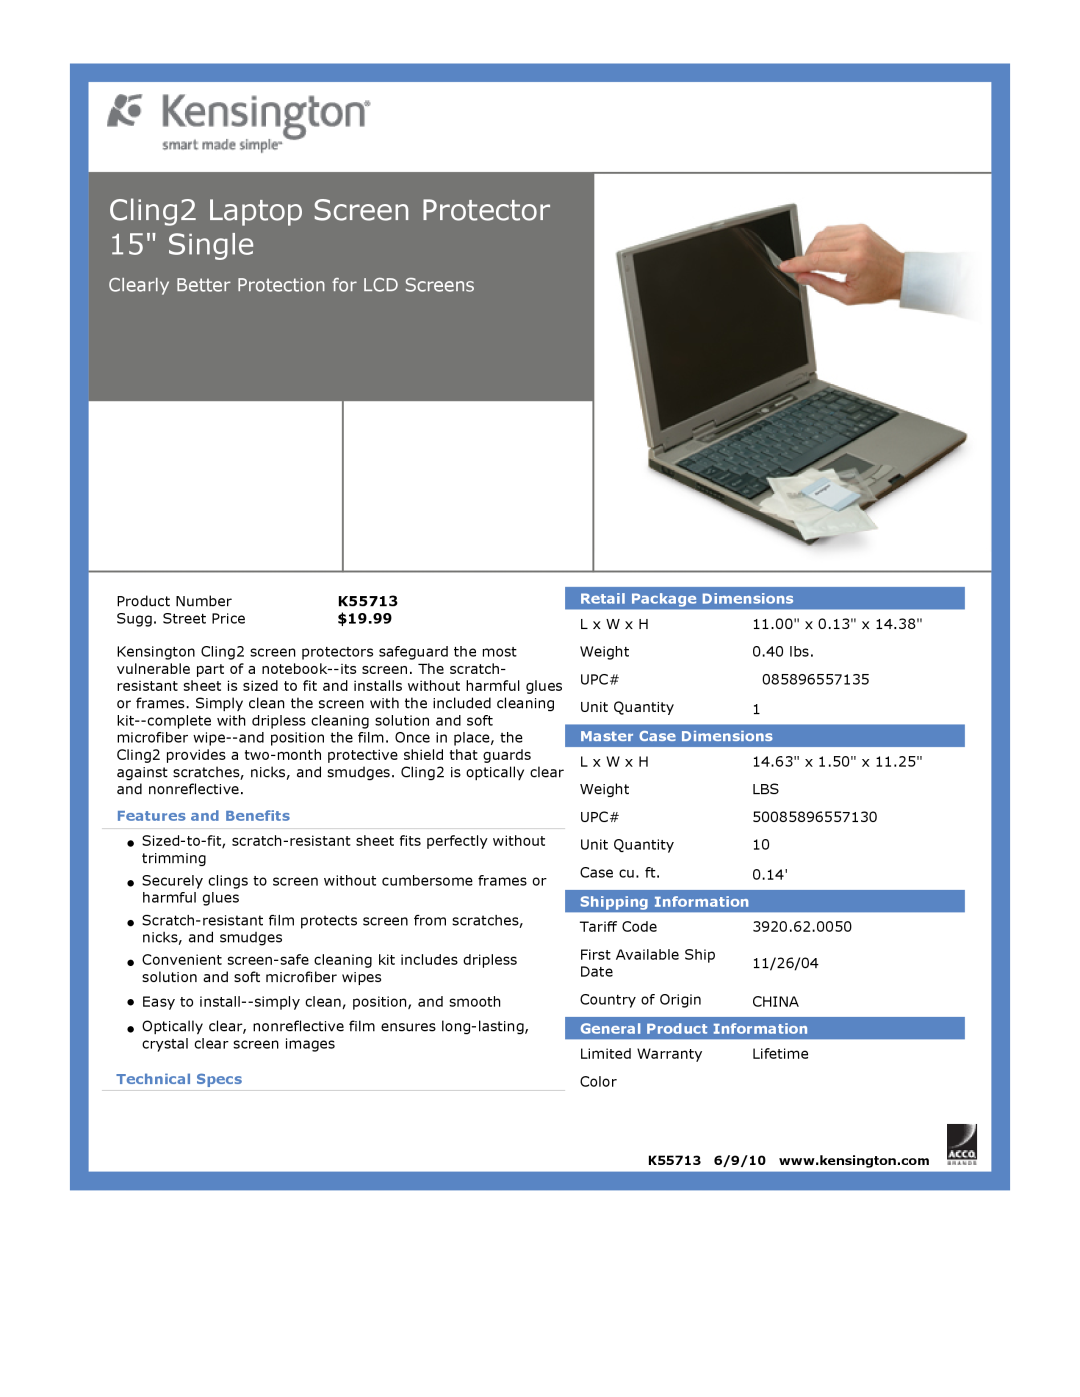 Kensington EU64325 dimensions Cling2 Laptop Screen Protector 15 Single, Clearly Better Protection for LCD Screens, $19.99 